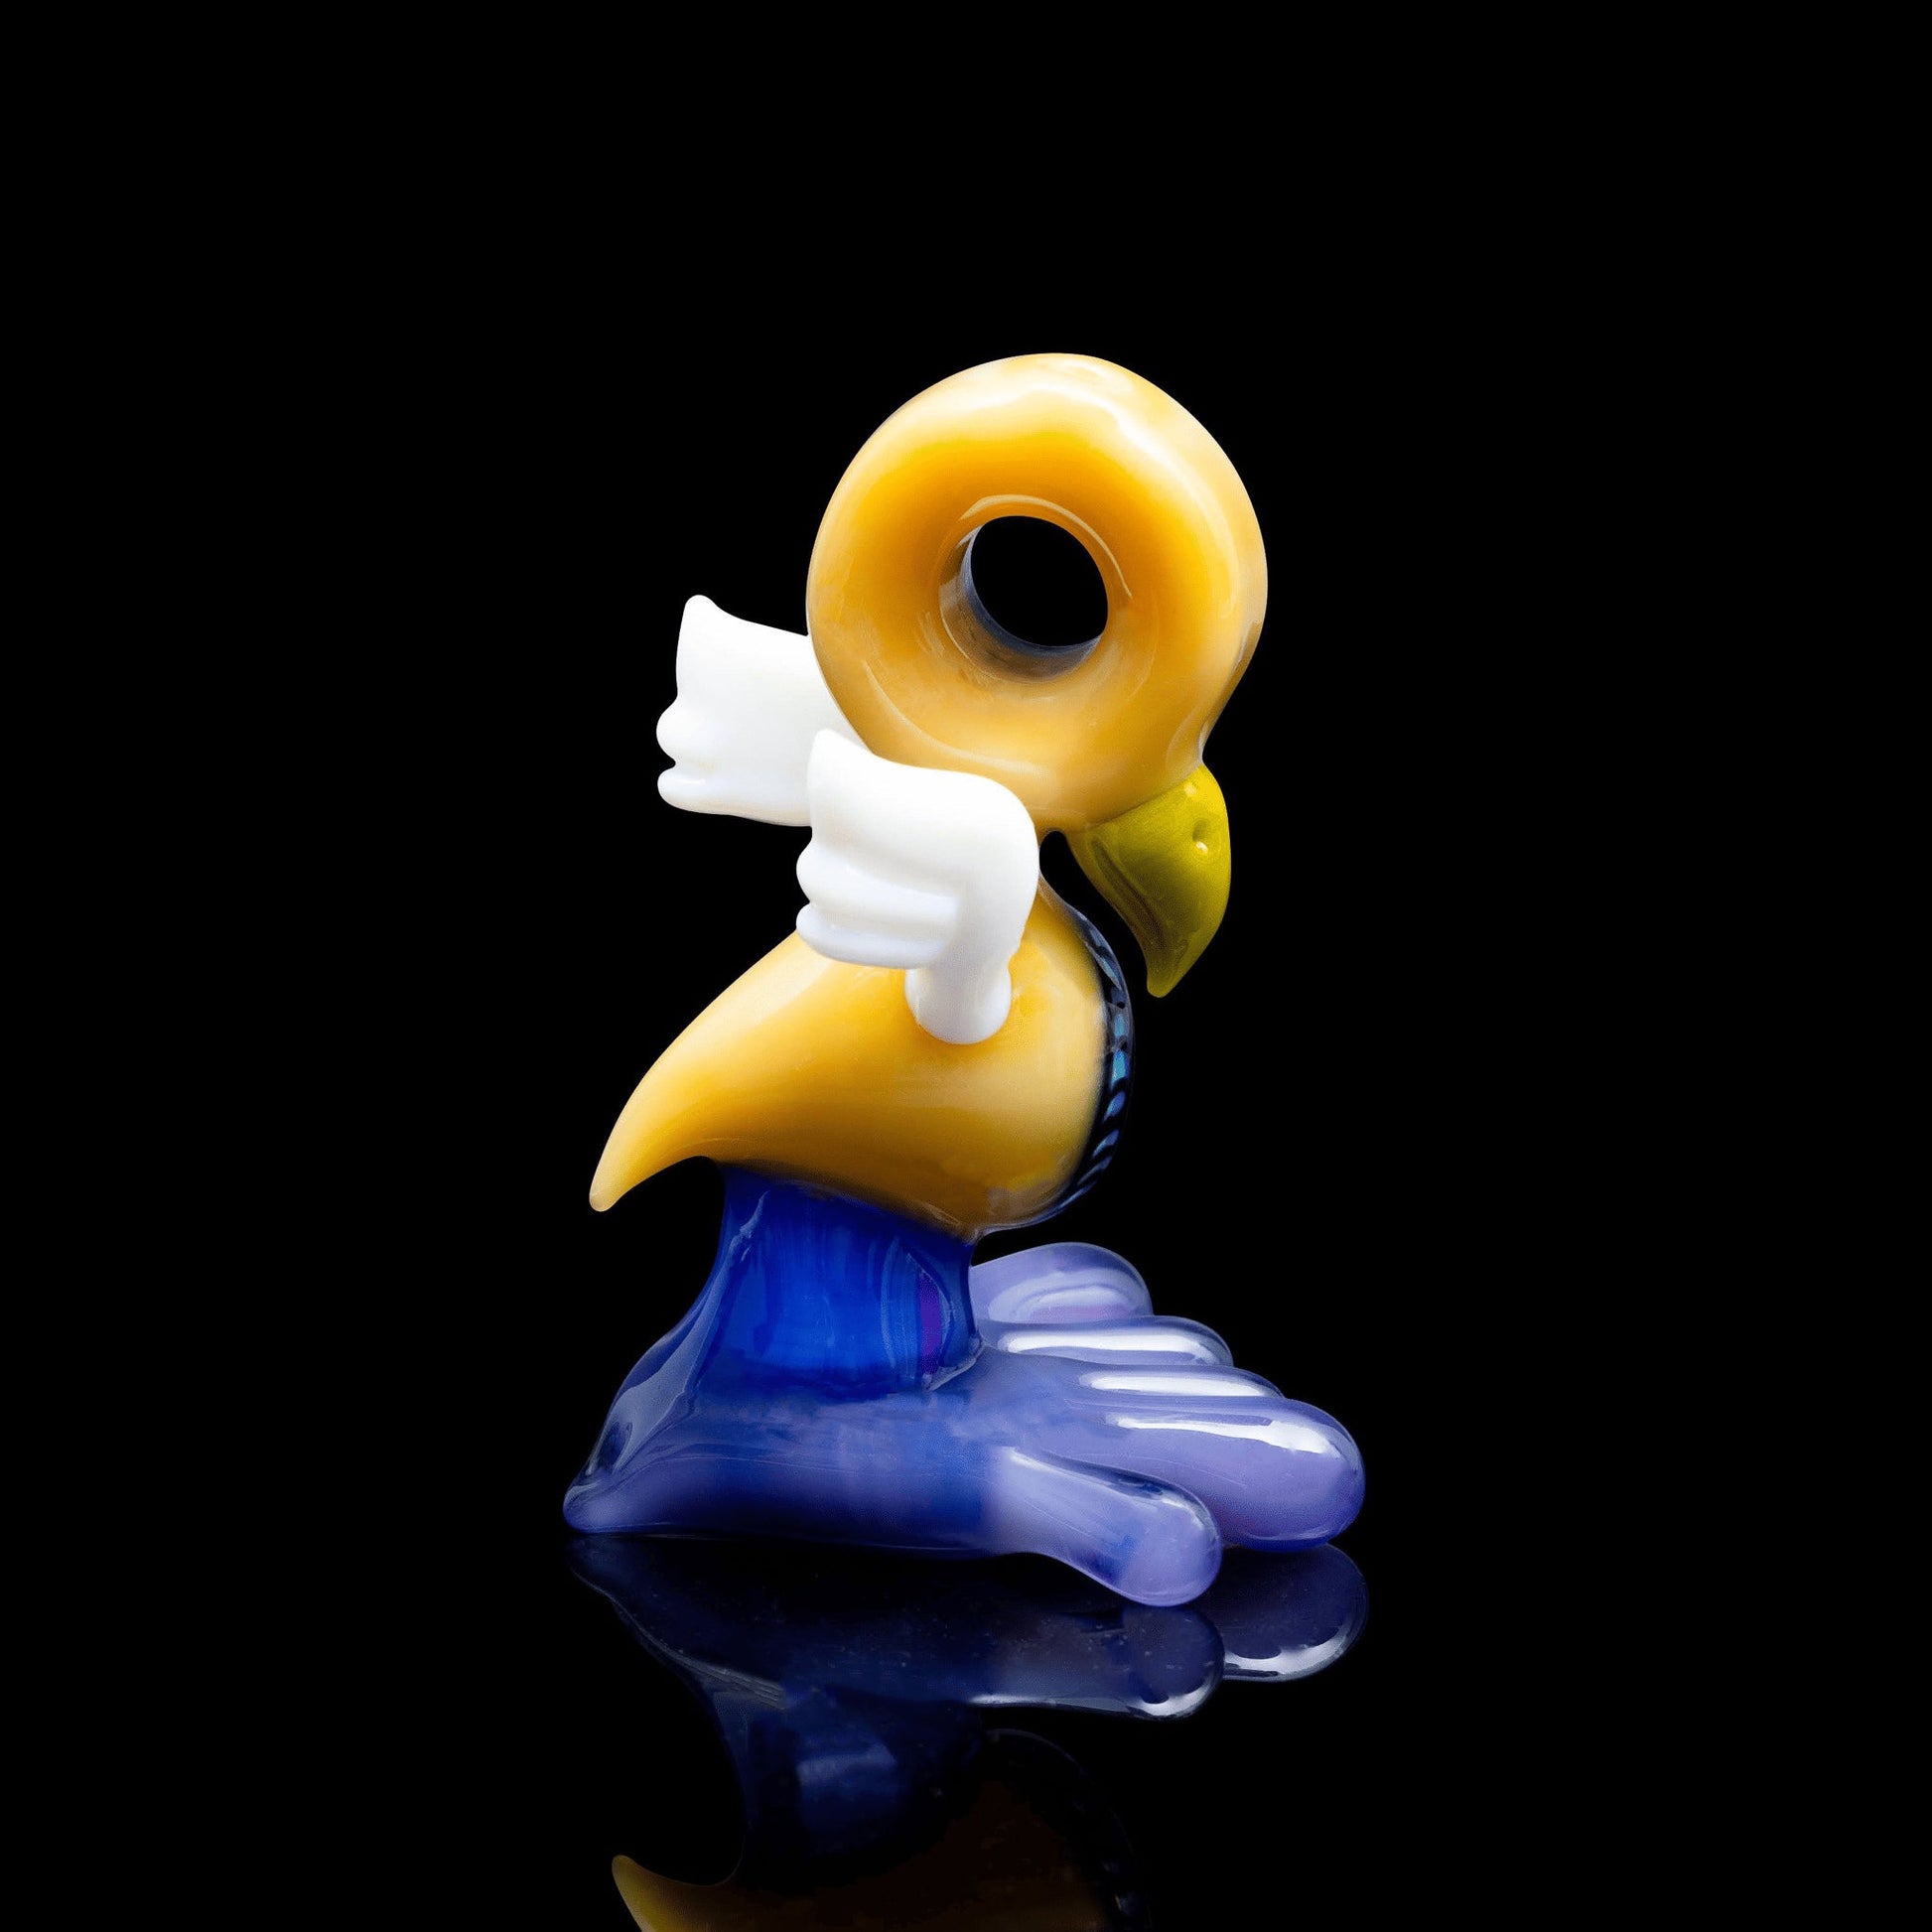 innovative design of the Collab Burdling Pipe by CalM x Jworth It  (DFO)